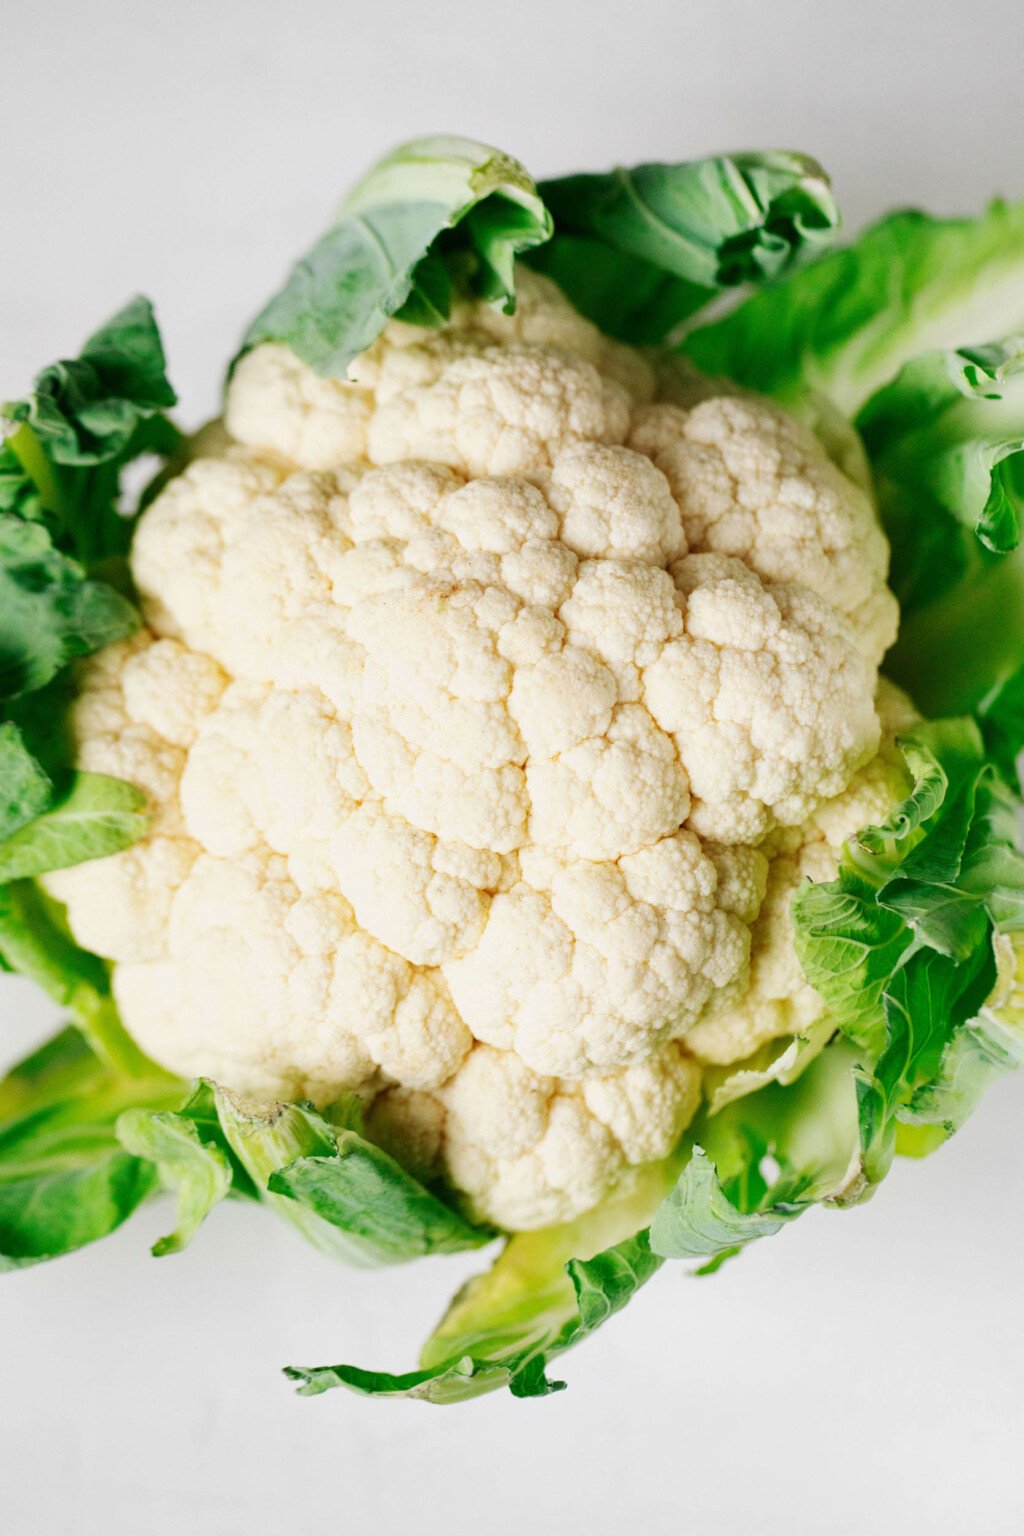 A head of cauliflower, surrounded by green leaves, is resting on a white surface.